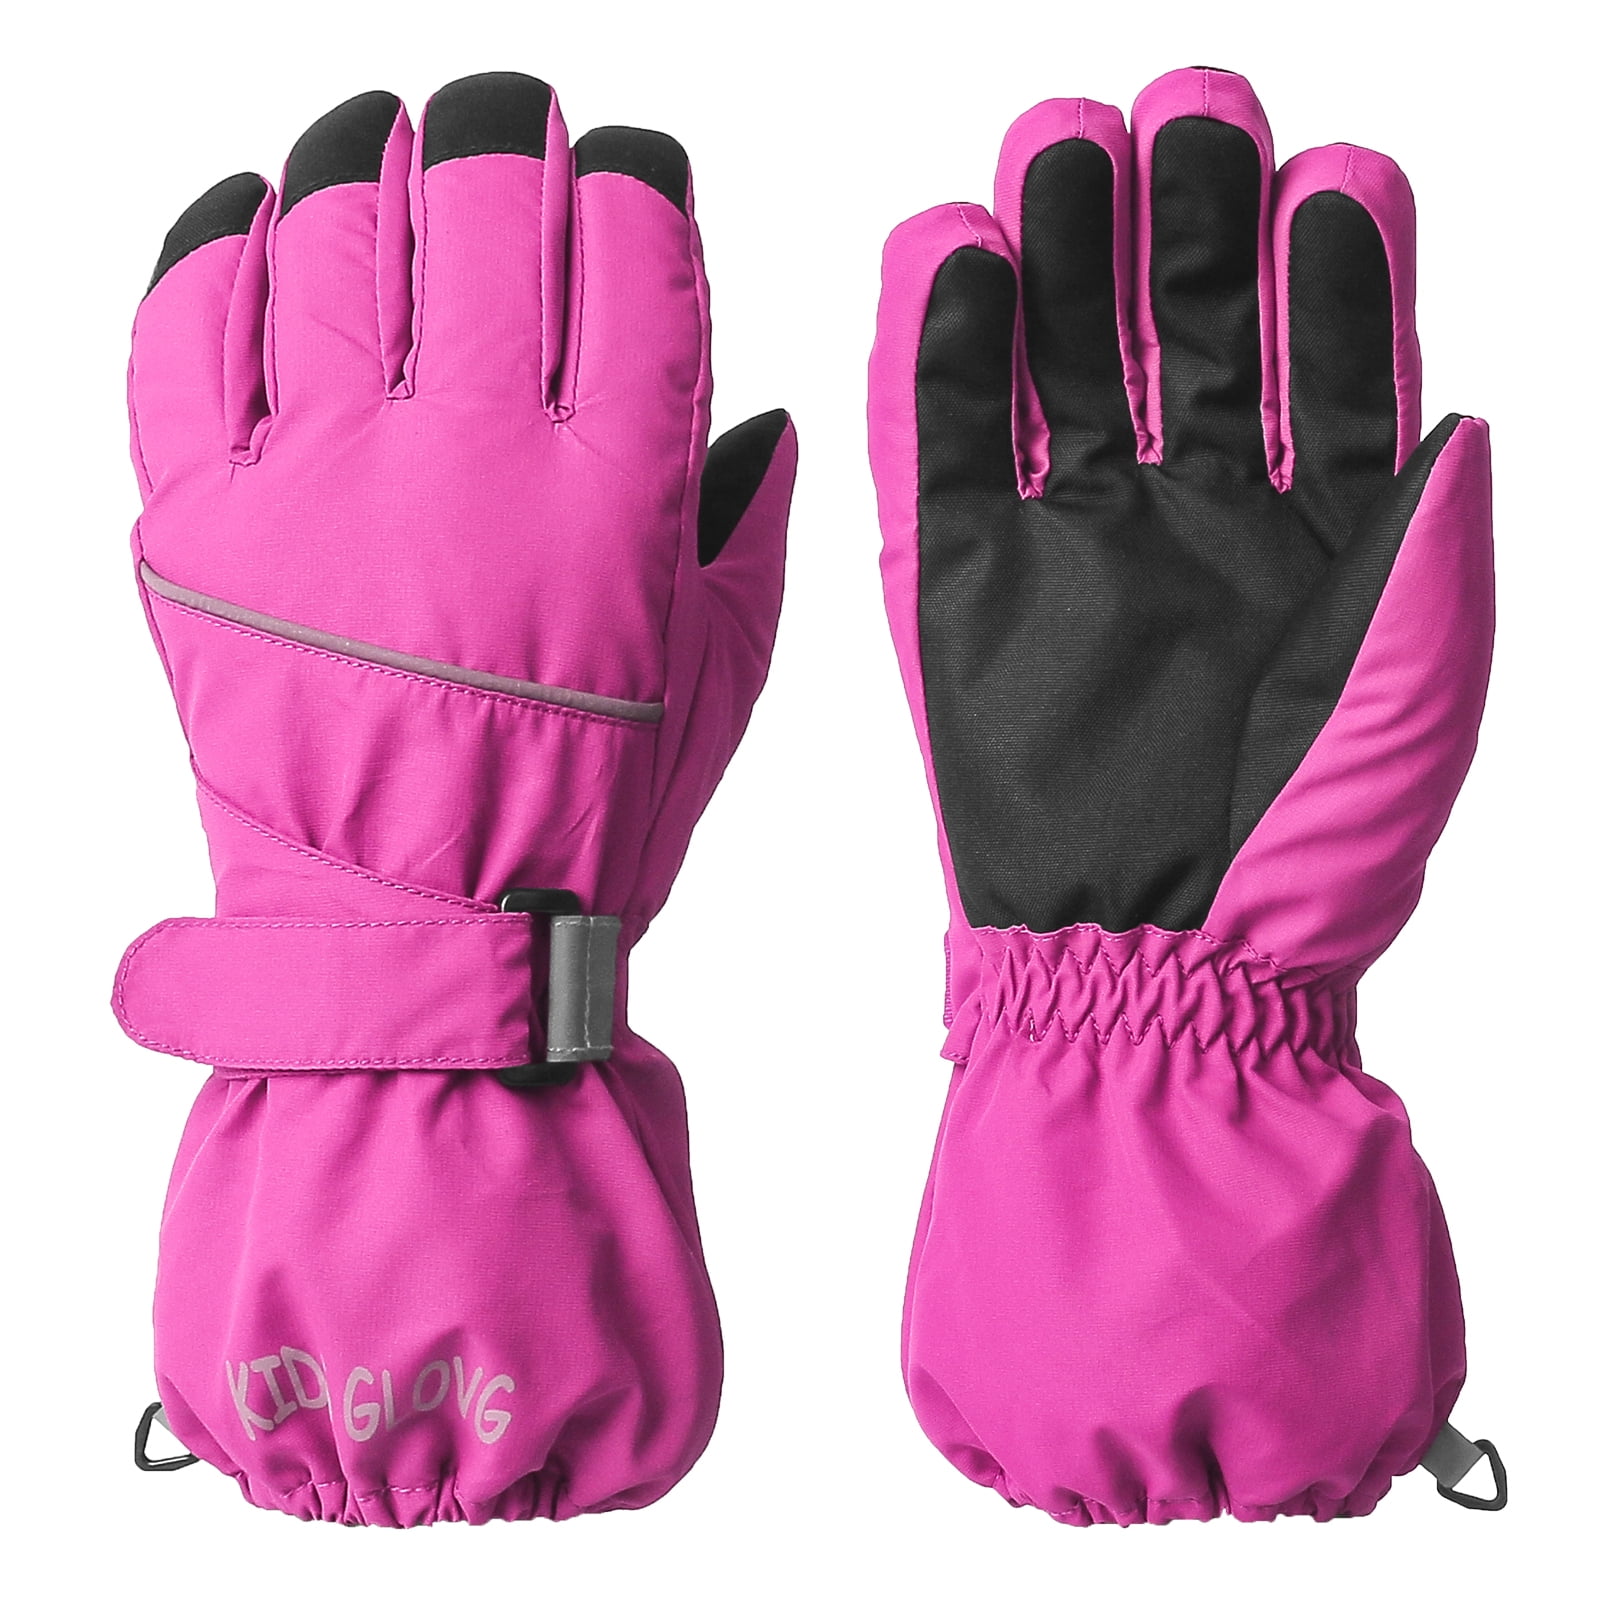 Thinsulate Children's Ski Gloves Warm Winter Gloves Boys Girls for 6-11 Years Running Gloves Windproof Waterproof Cycling Gloves Thermal Gloves Children's Gloves for Skiing Playing